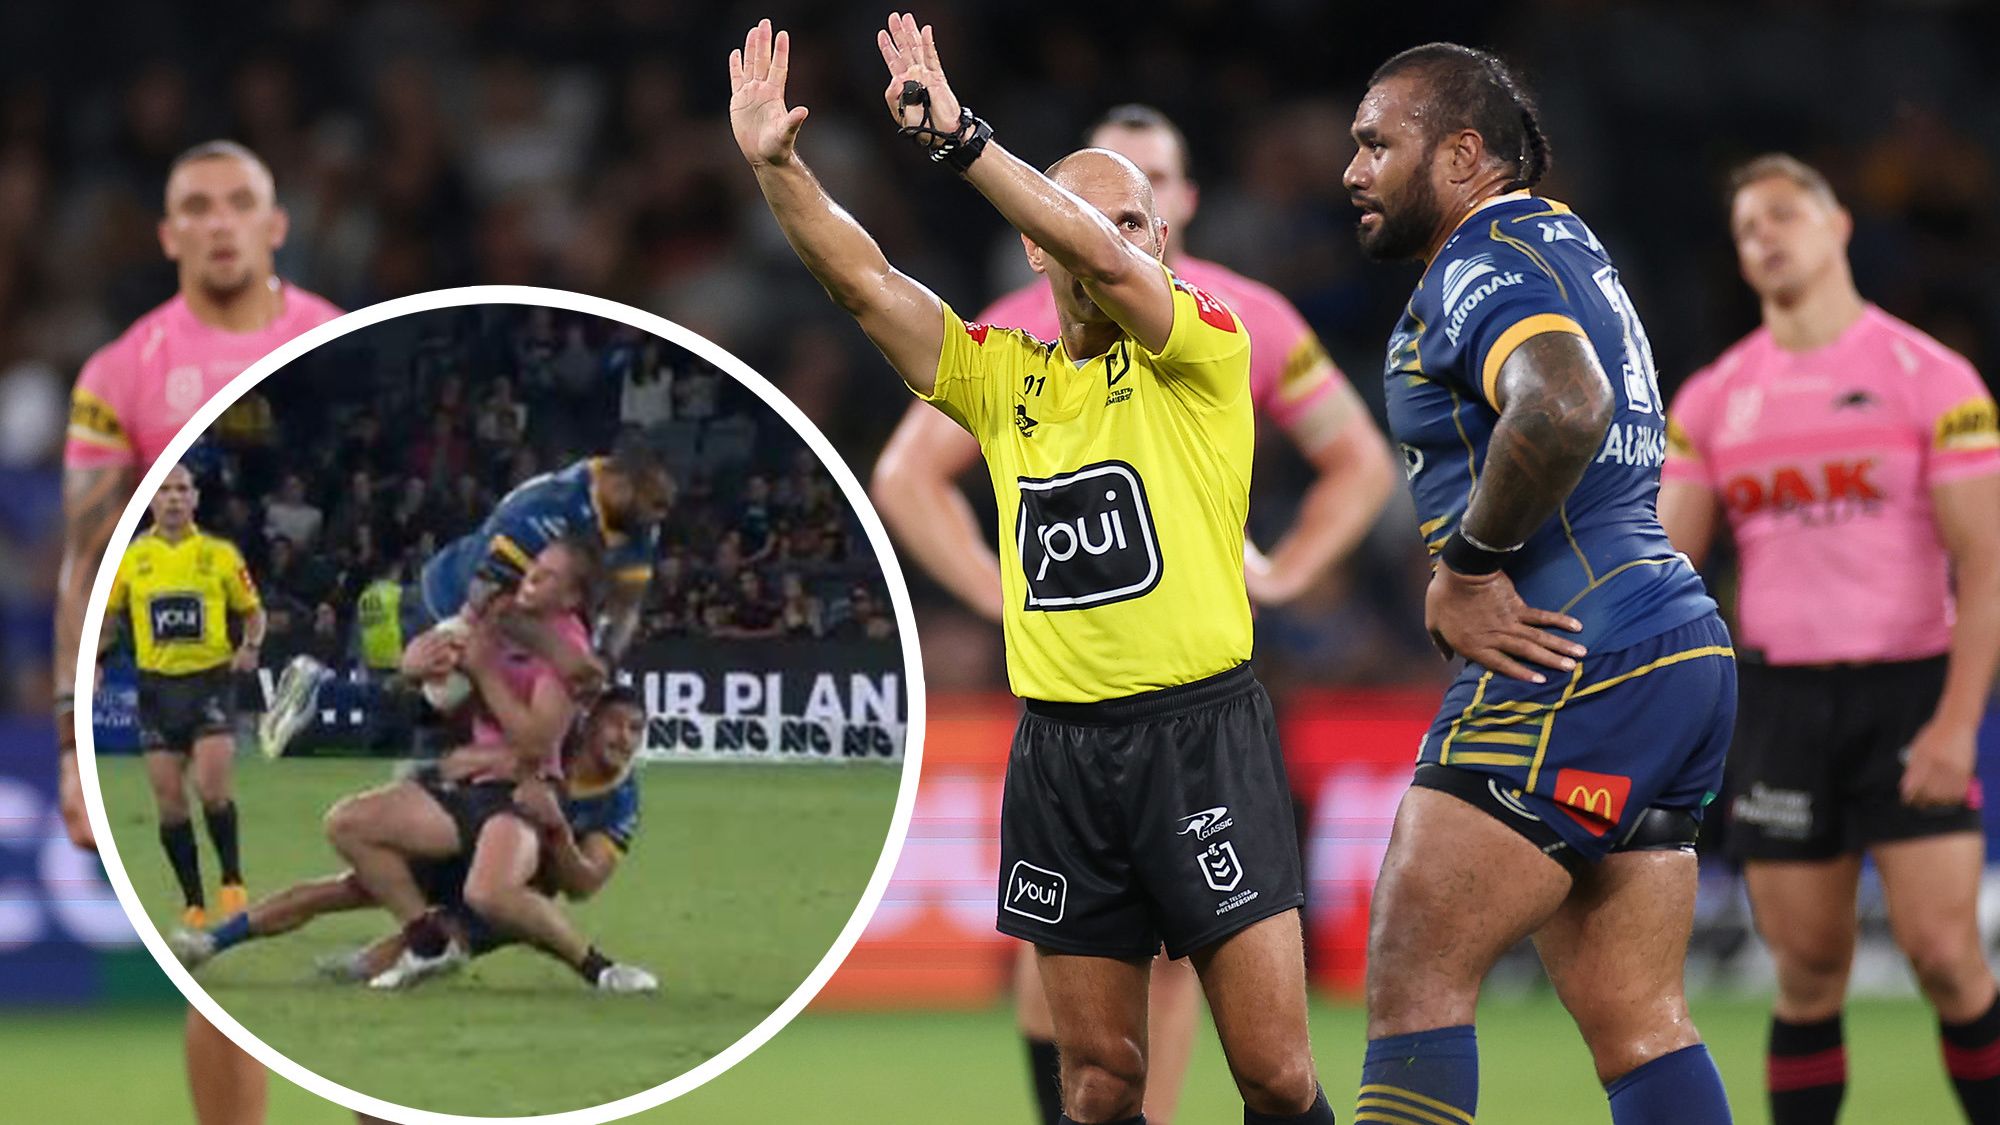 Huge blow for Eels as star prop faces ban for 'serious' high tackle